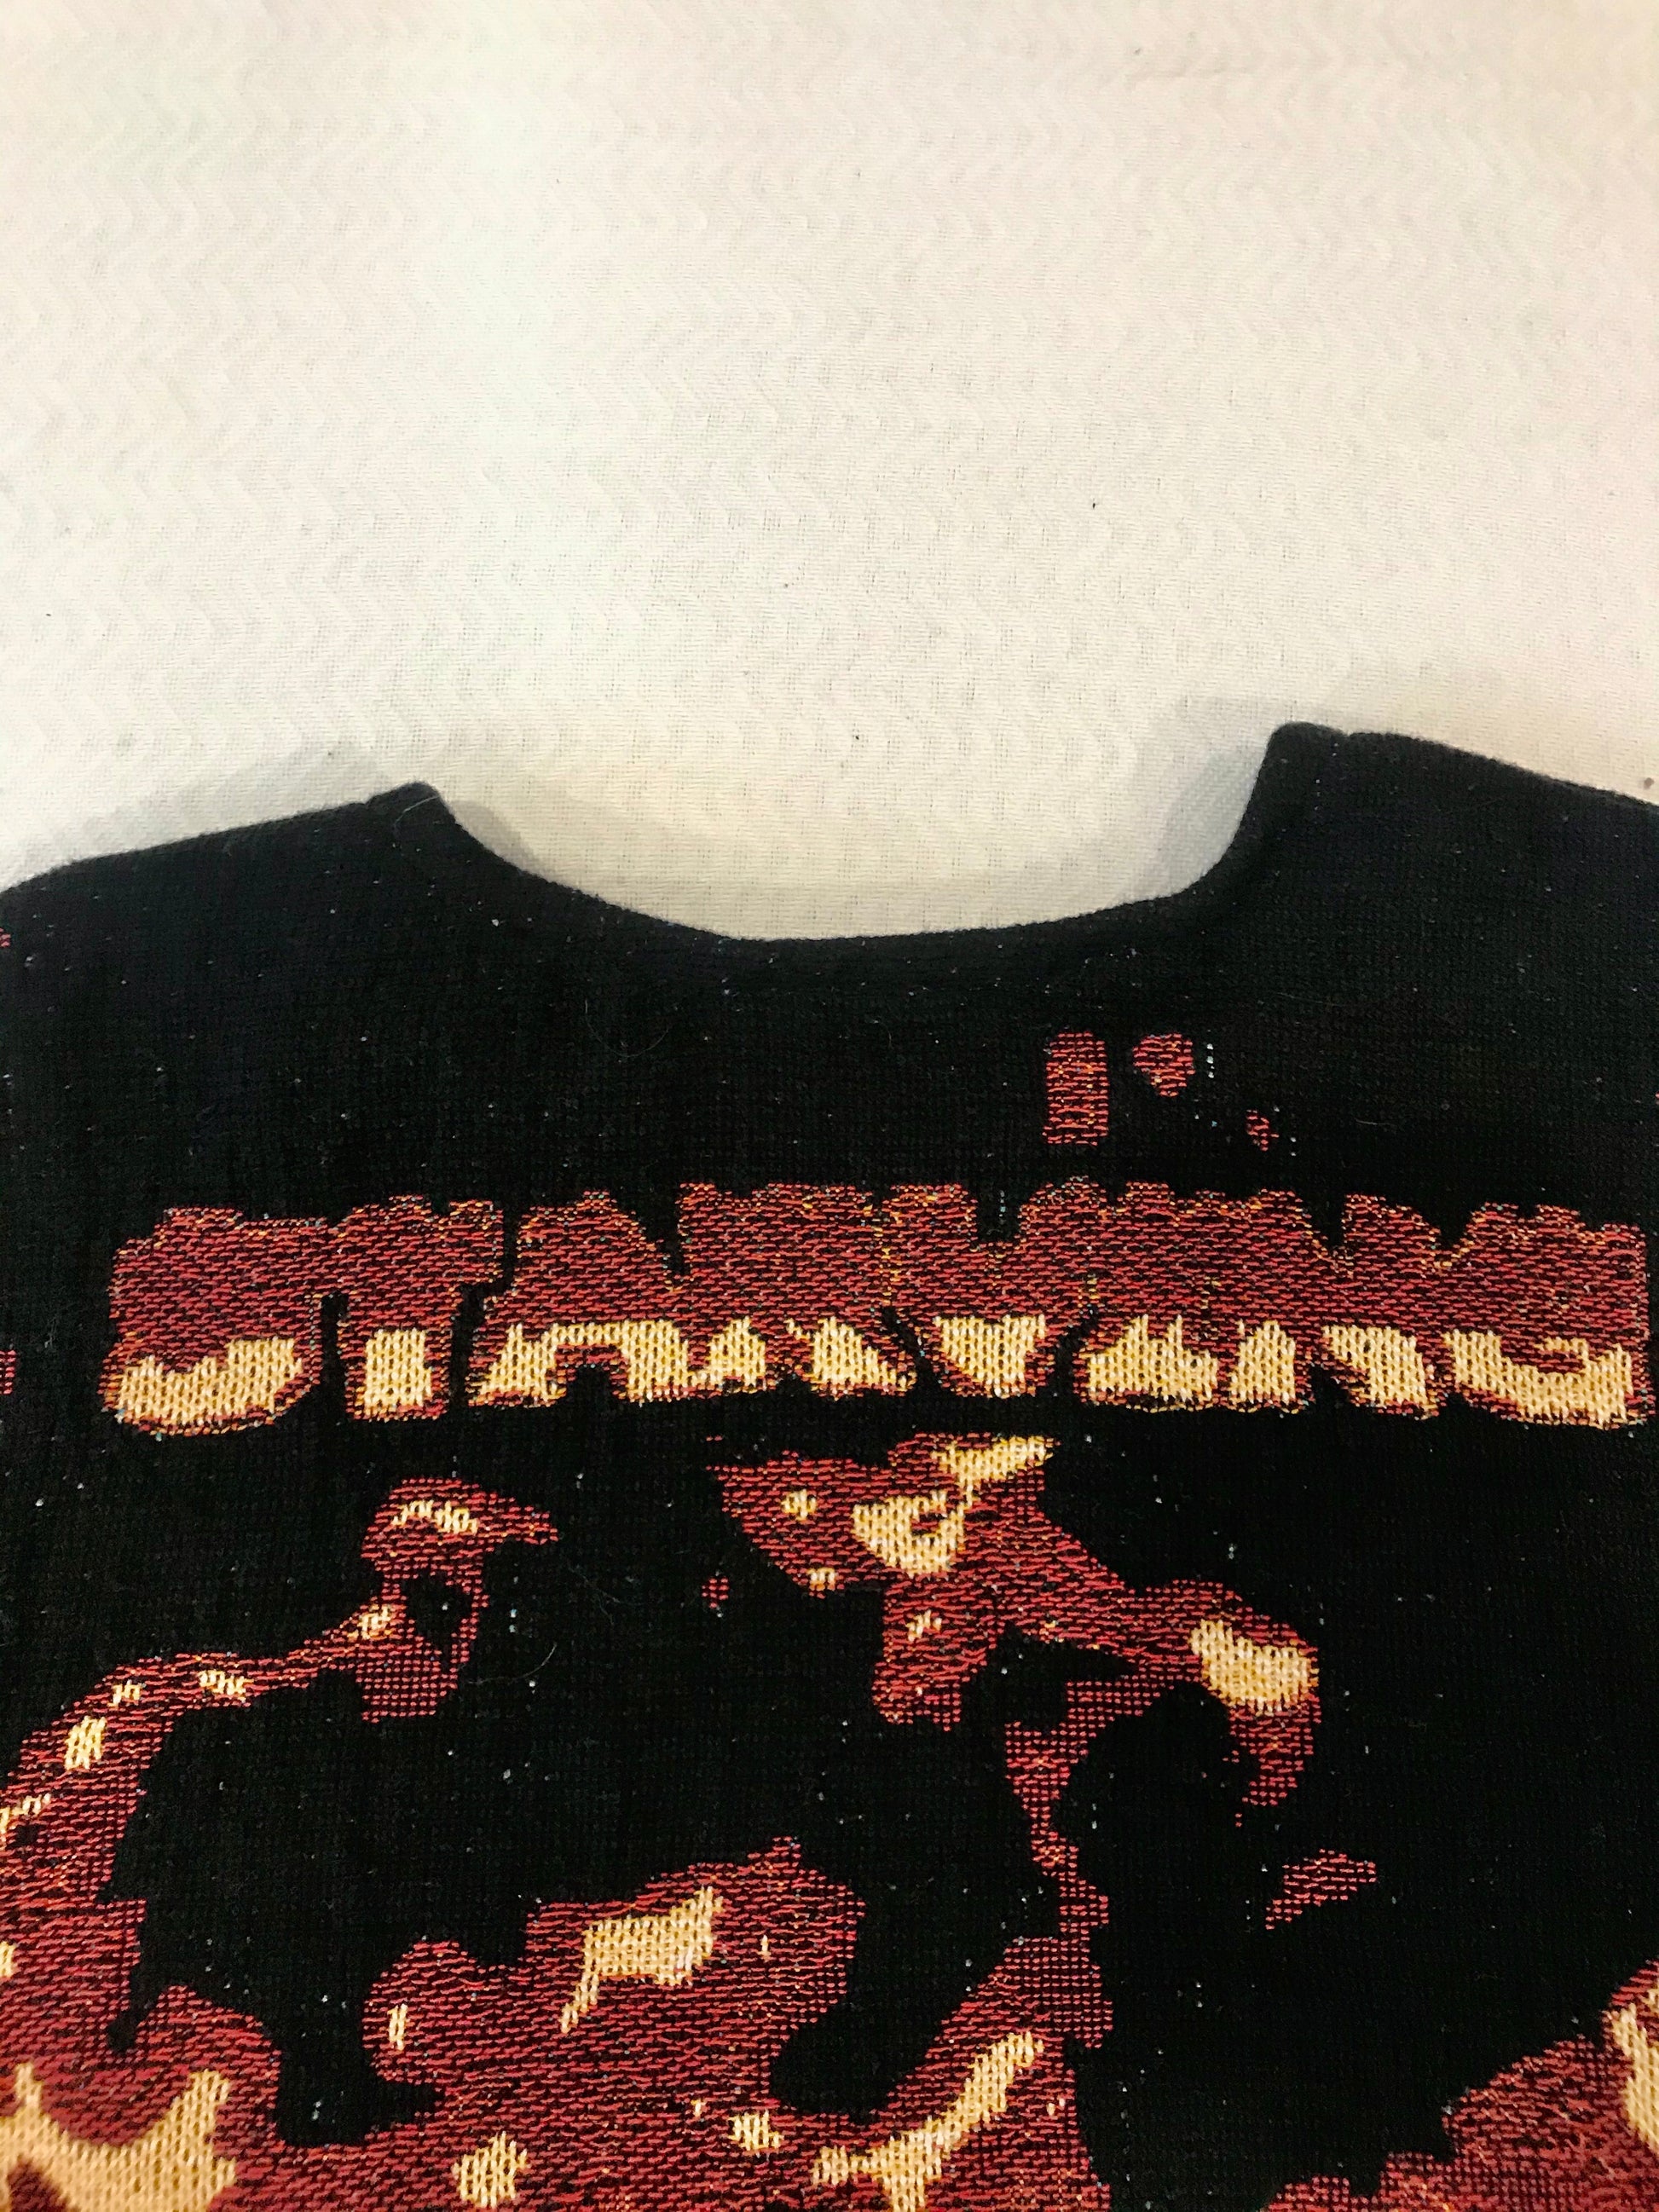 FATALITY Woven Tapestry Crewneck - Starving Brand